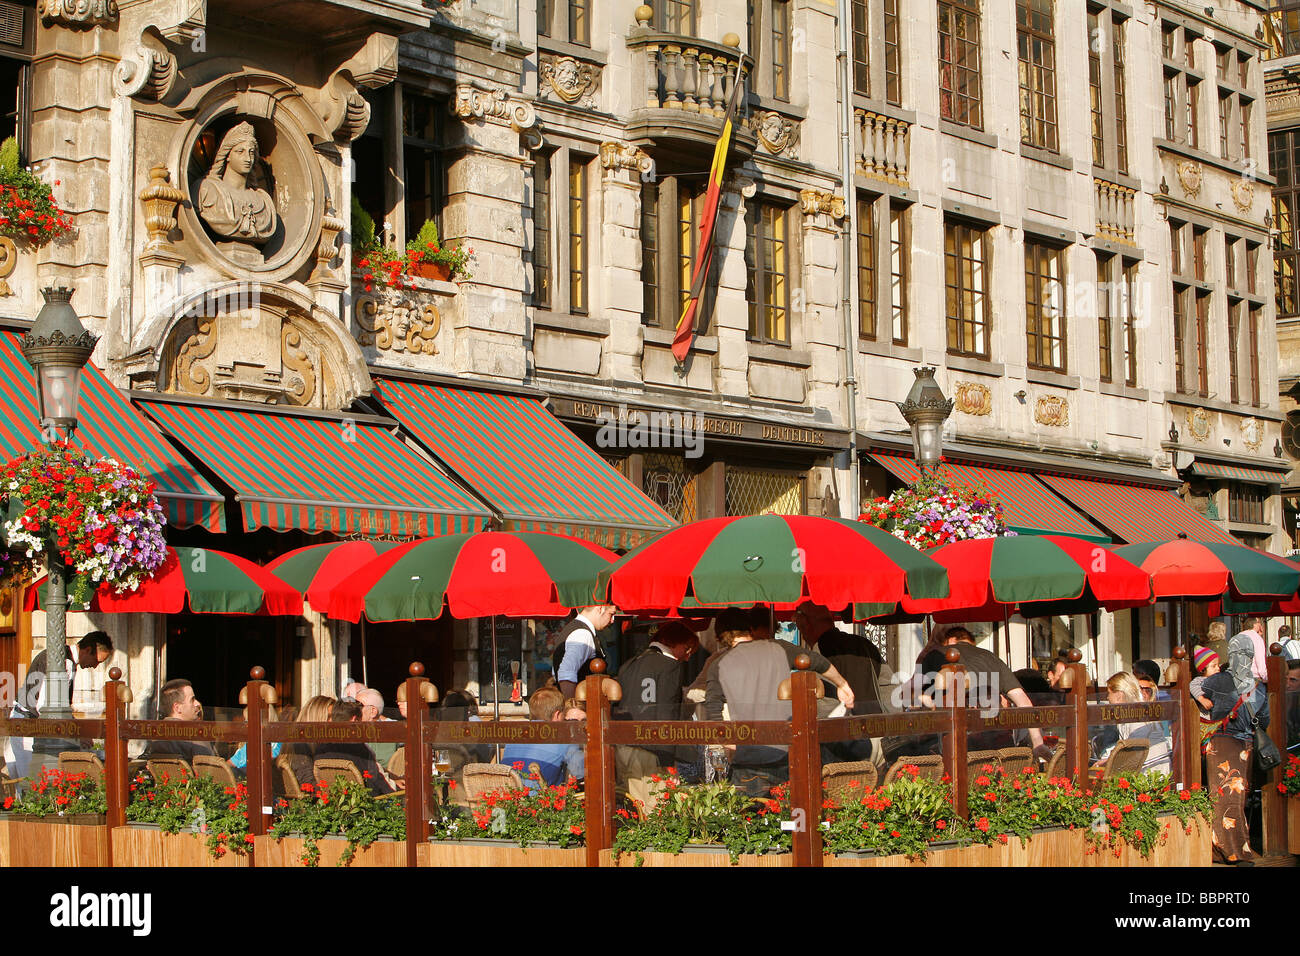 SIDEWALK CAFE, LA CHALOUPE D'OR, GRAND-PLACE (MAIN SQUARE), BRUSSELS, BELGIUM Stock Photo